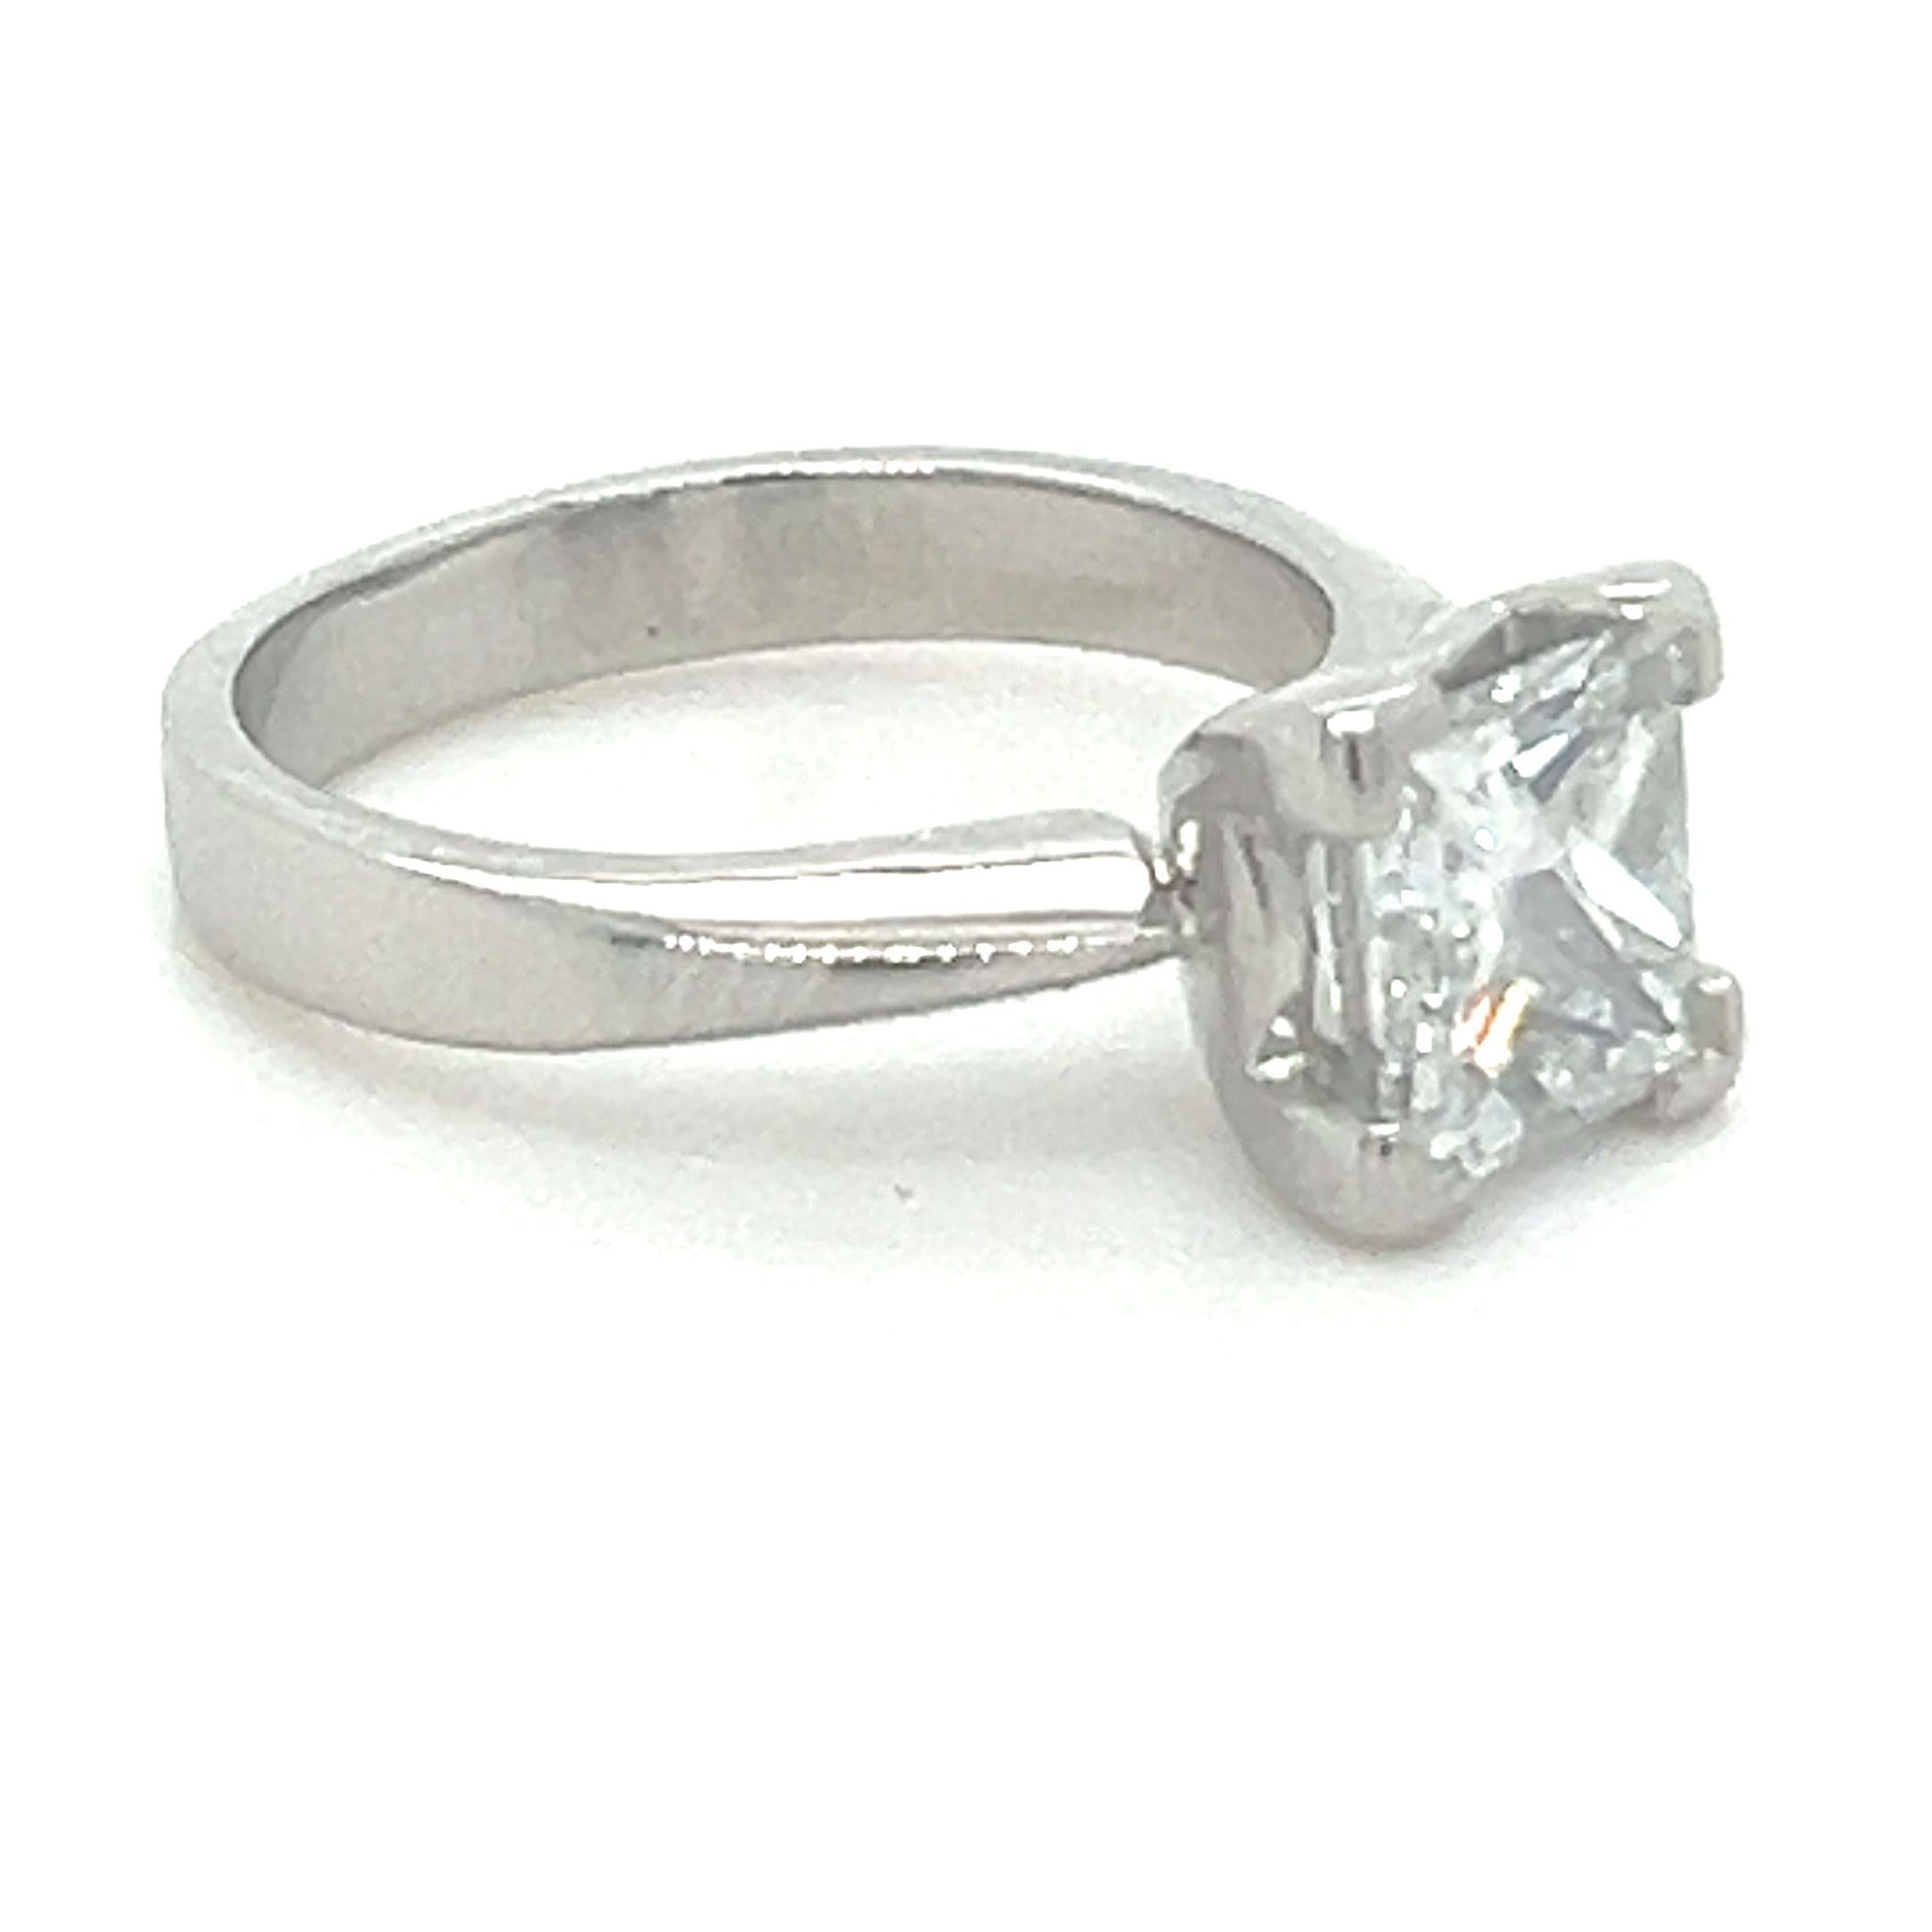 A GIA Solitaire Square Princess Cut Diamond Ring, four claw set in platinum on a 3.2mm reverse tapered band

GIA report 16315644 dated 8/10/2007:- Measurements : 7.33 x 6.99 x 4.94mm, Depth: 70.7% 

Fluorescence: None, Girdle thickness: Extremely